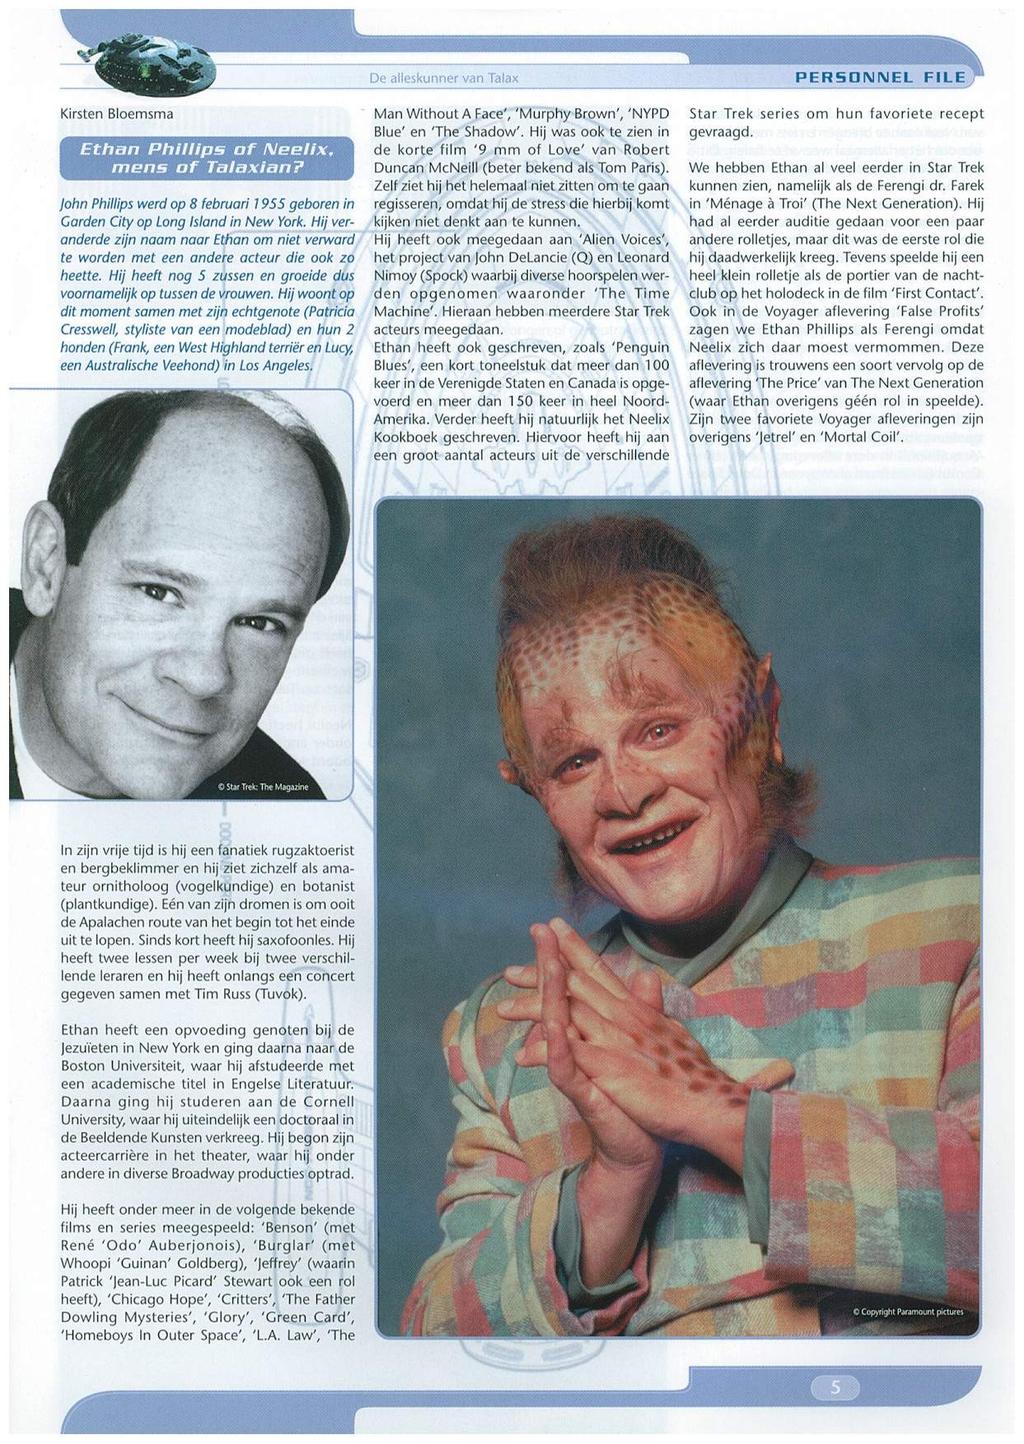 PERSONNEL FILE Kirsten Bloemsma Ethan Phil/ips of Neelix. Man Without A Face', 'Murphy Brown', 'NYPD Blue' en 'The Shadow'.